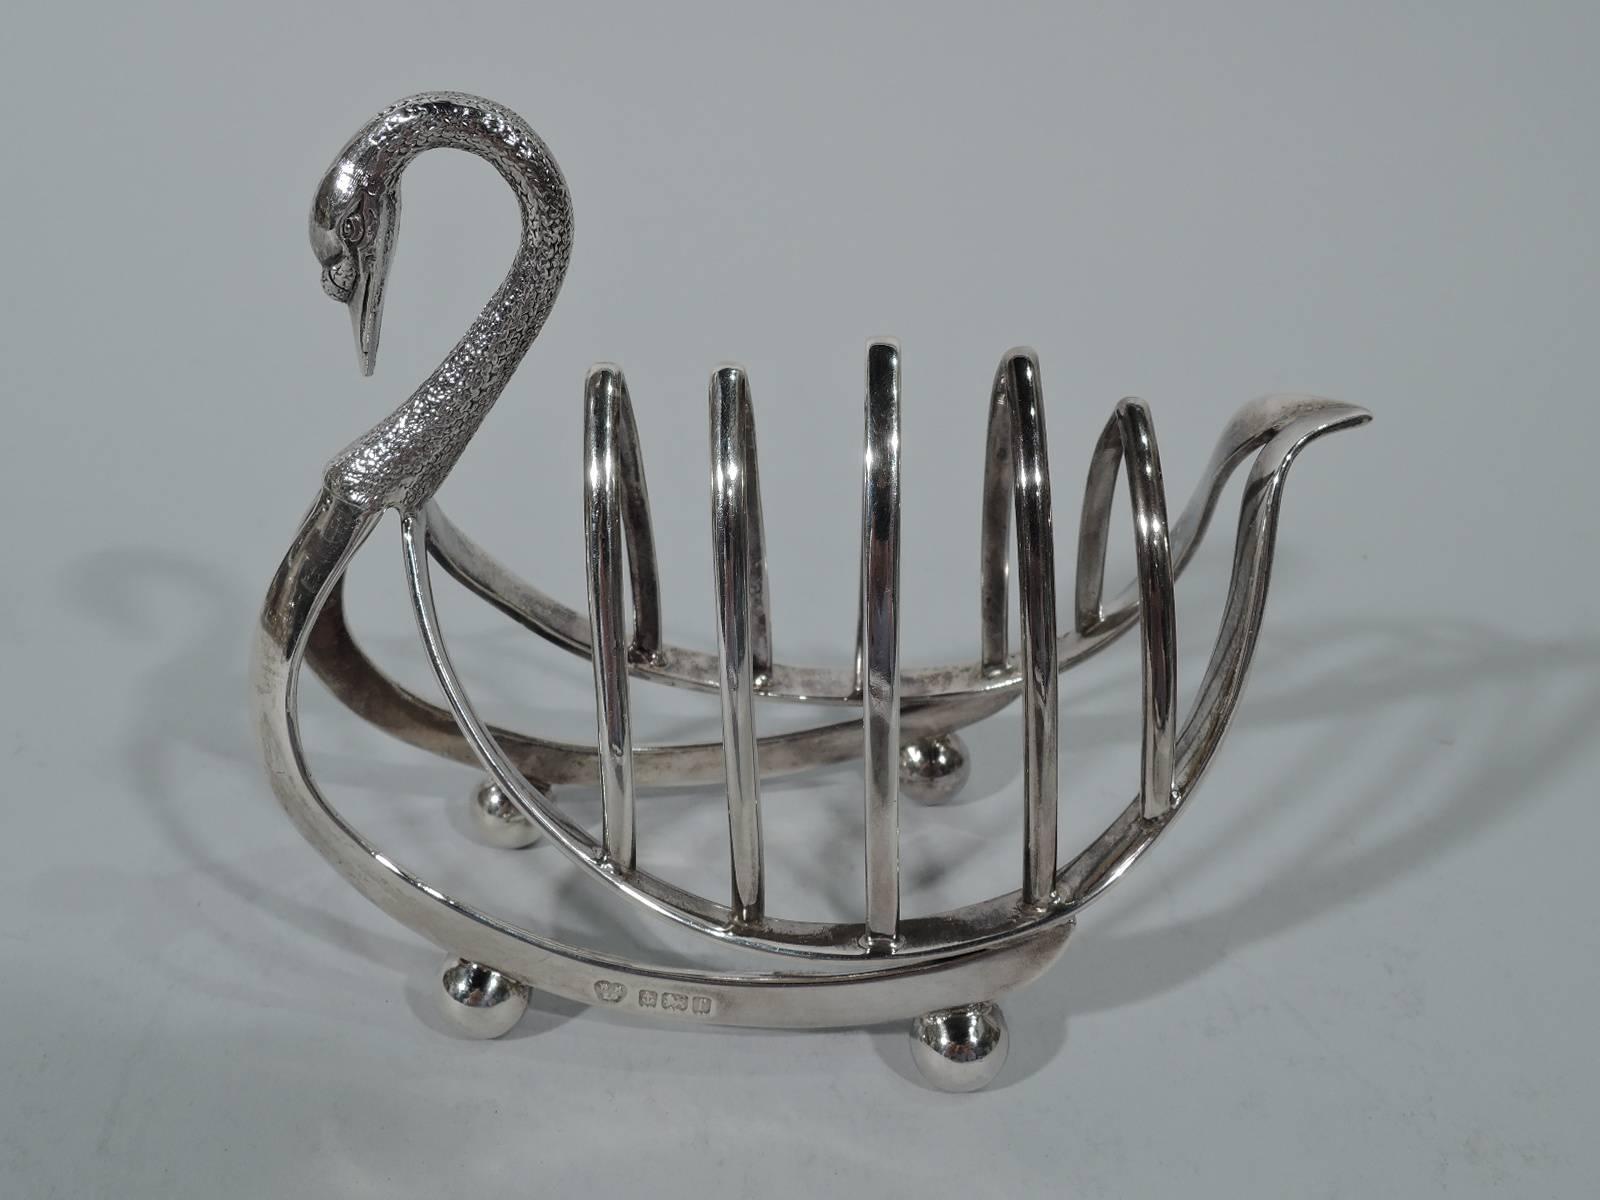 Edwardian sterling silver toast rack. Made by Williams Birmingham Ltd in Birmingham in 1905. Swan-form with five arched partitions in boat-form frame mounted to split and curved open body. Scrolled and stippled neck with pointed bill and beady eyes.